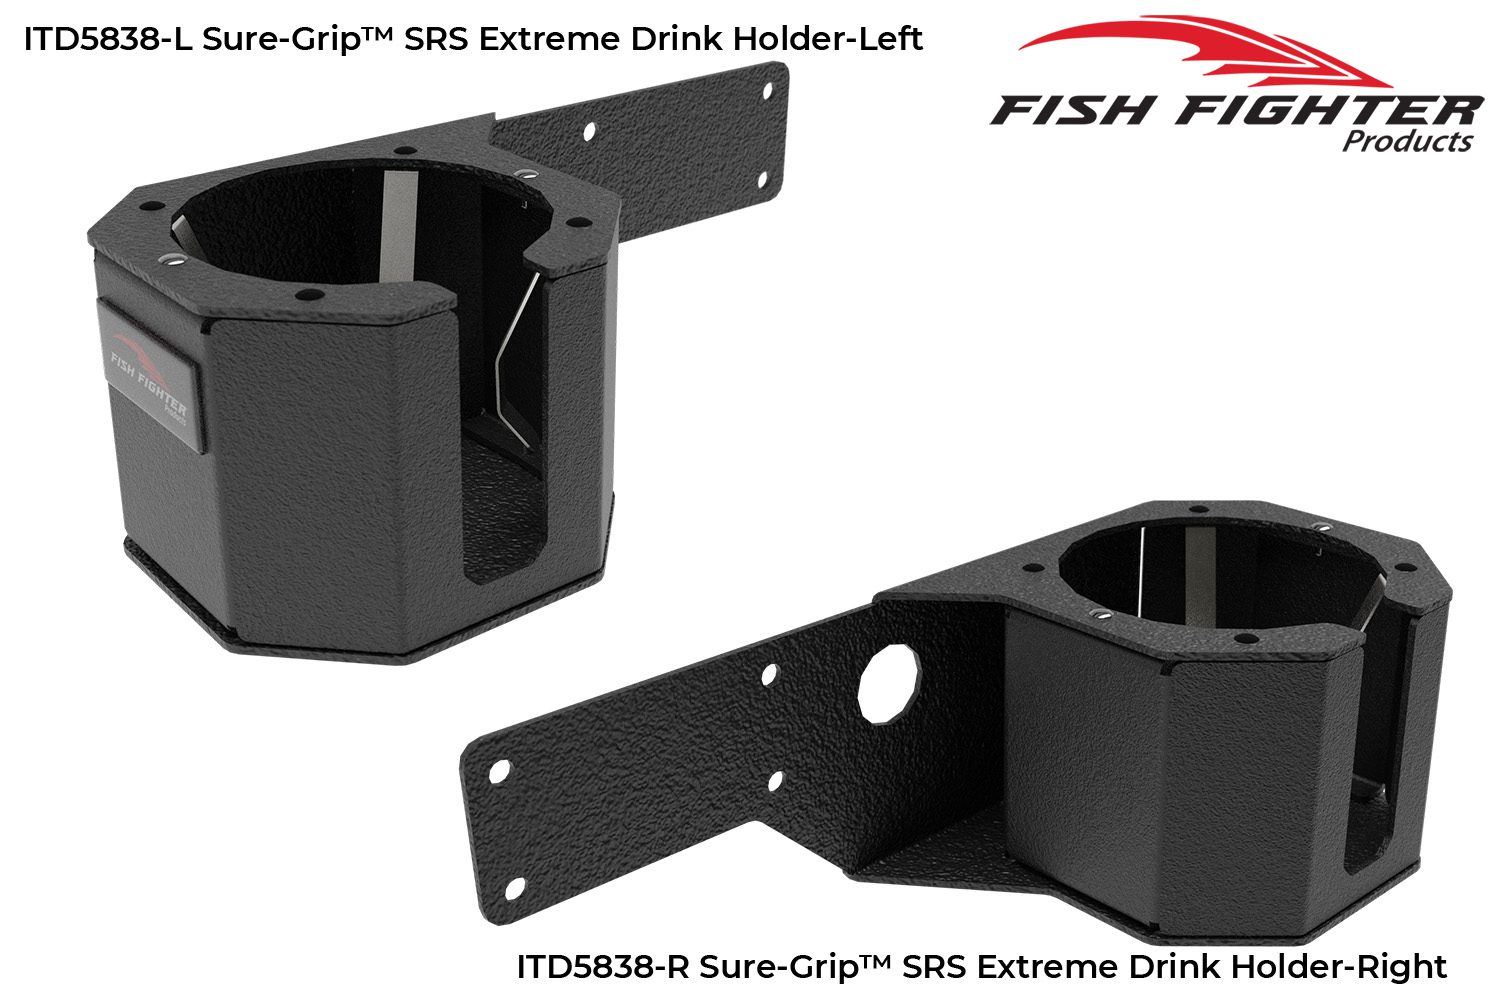 Sure-Grip™ SRS™ Extreme Drink Holder - Fish Fighter® Products